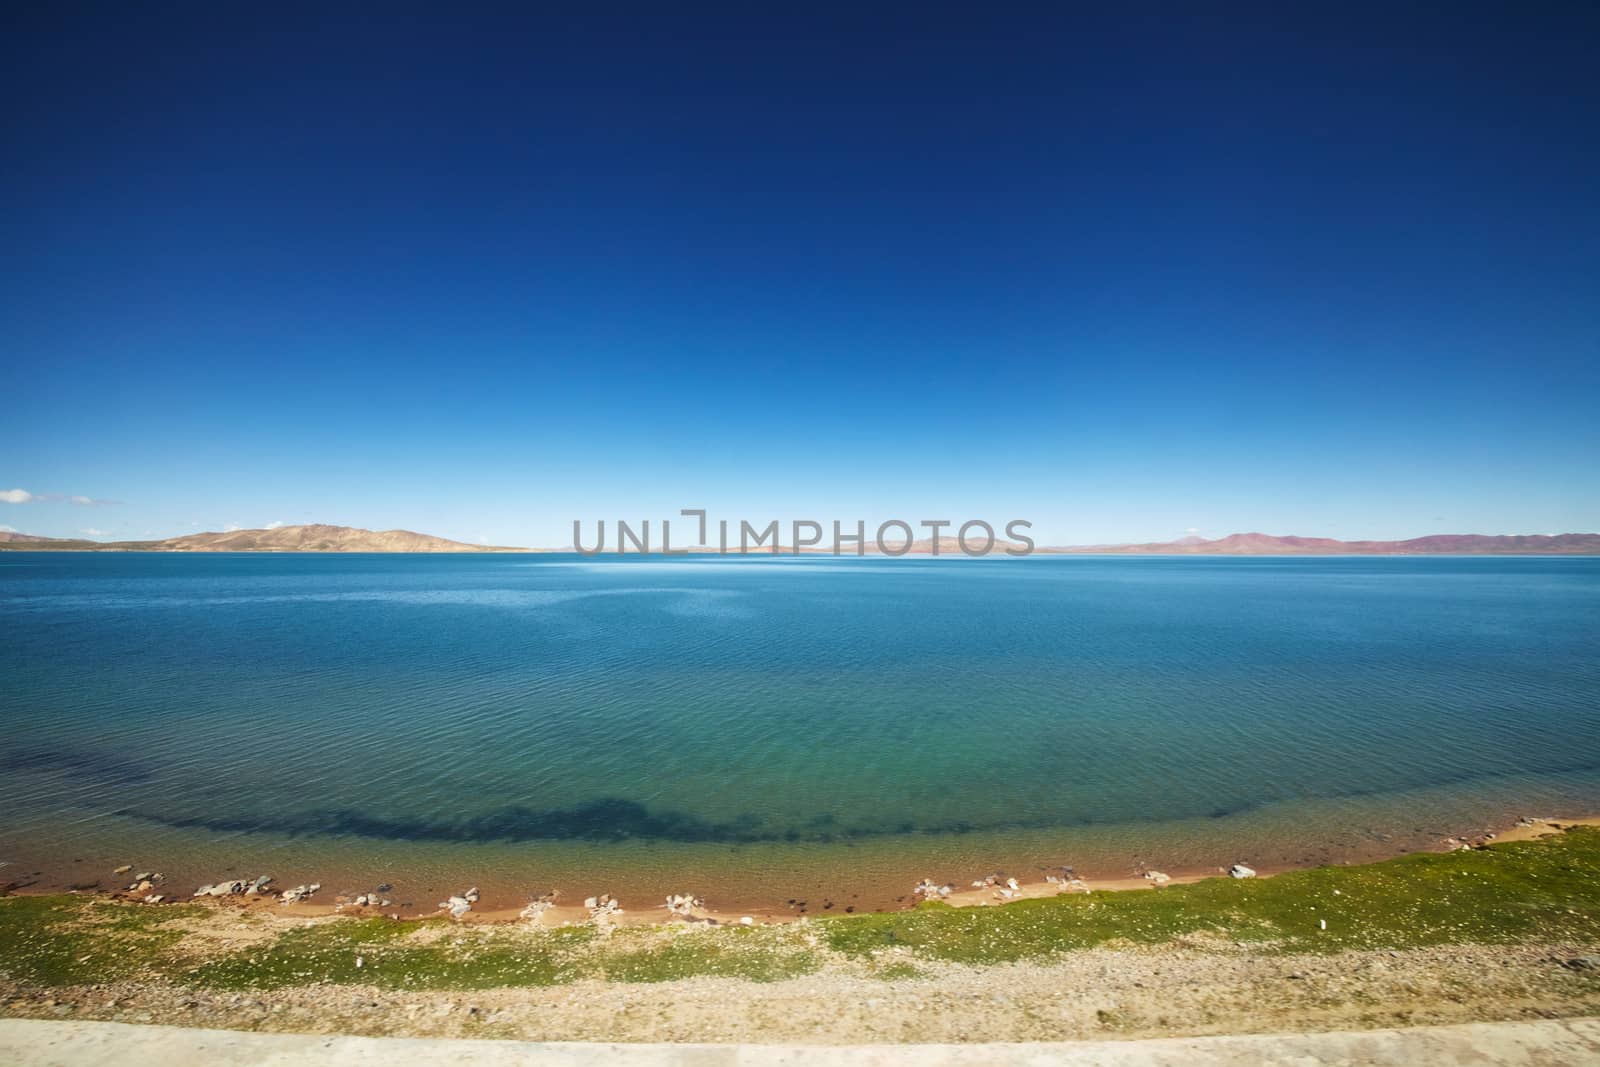 A view of the blue Qinghai lake from the Qinghai Tibet train.